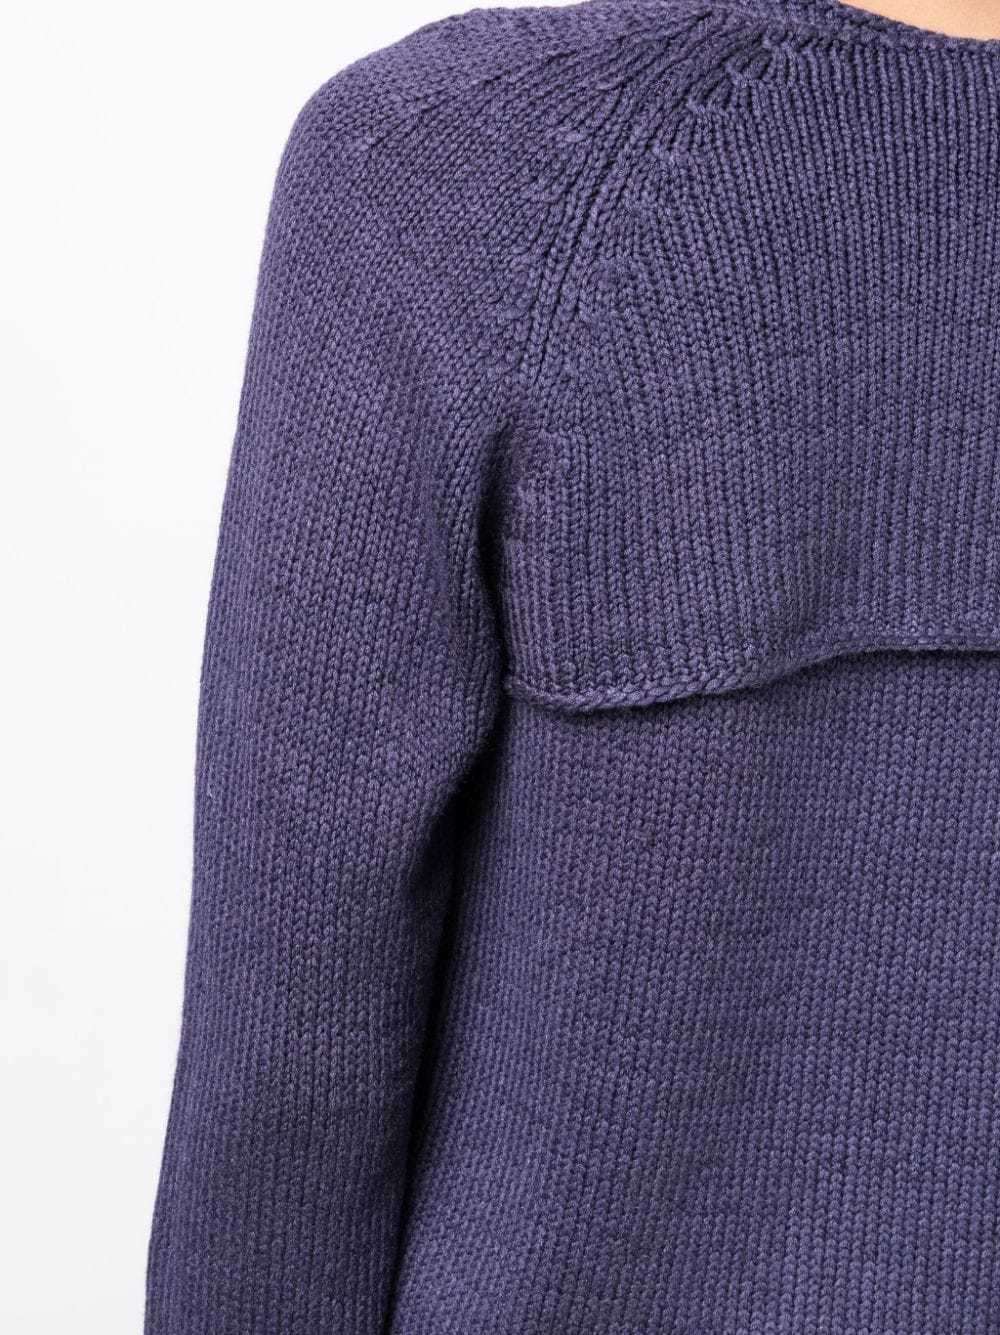 Hermès Pre-Owned 1990-2000s two-piece knit top - … - image 5